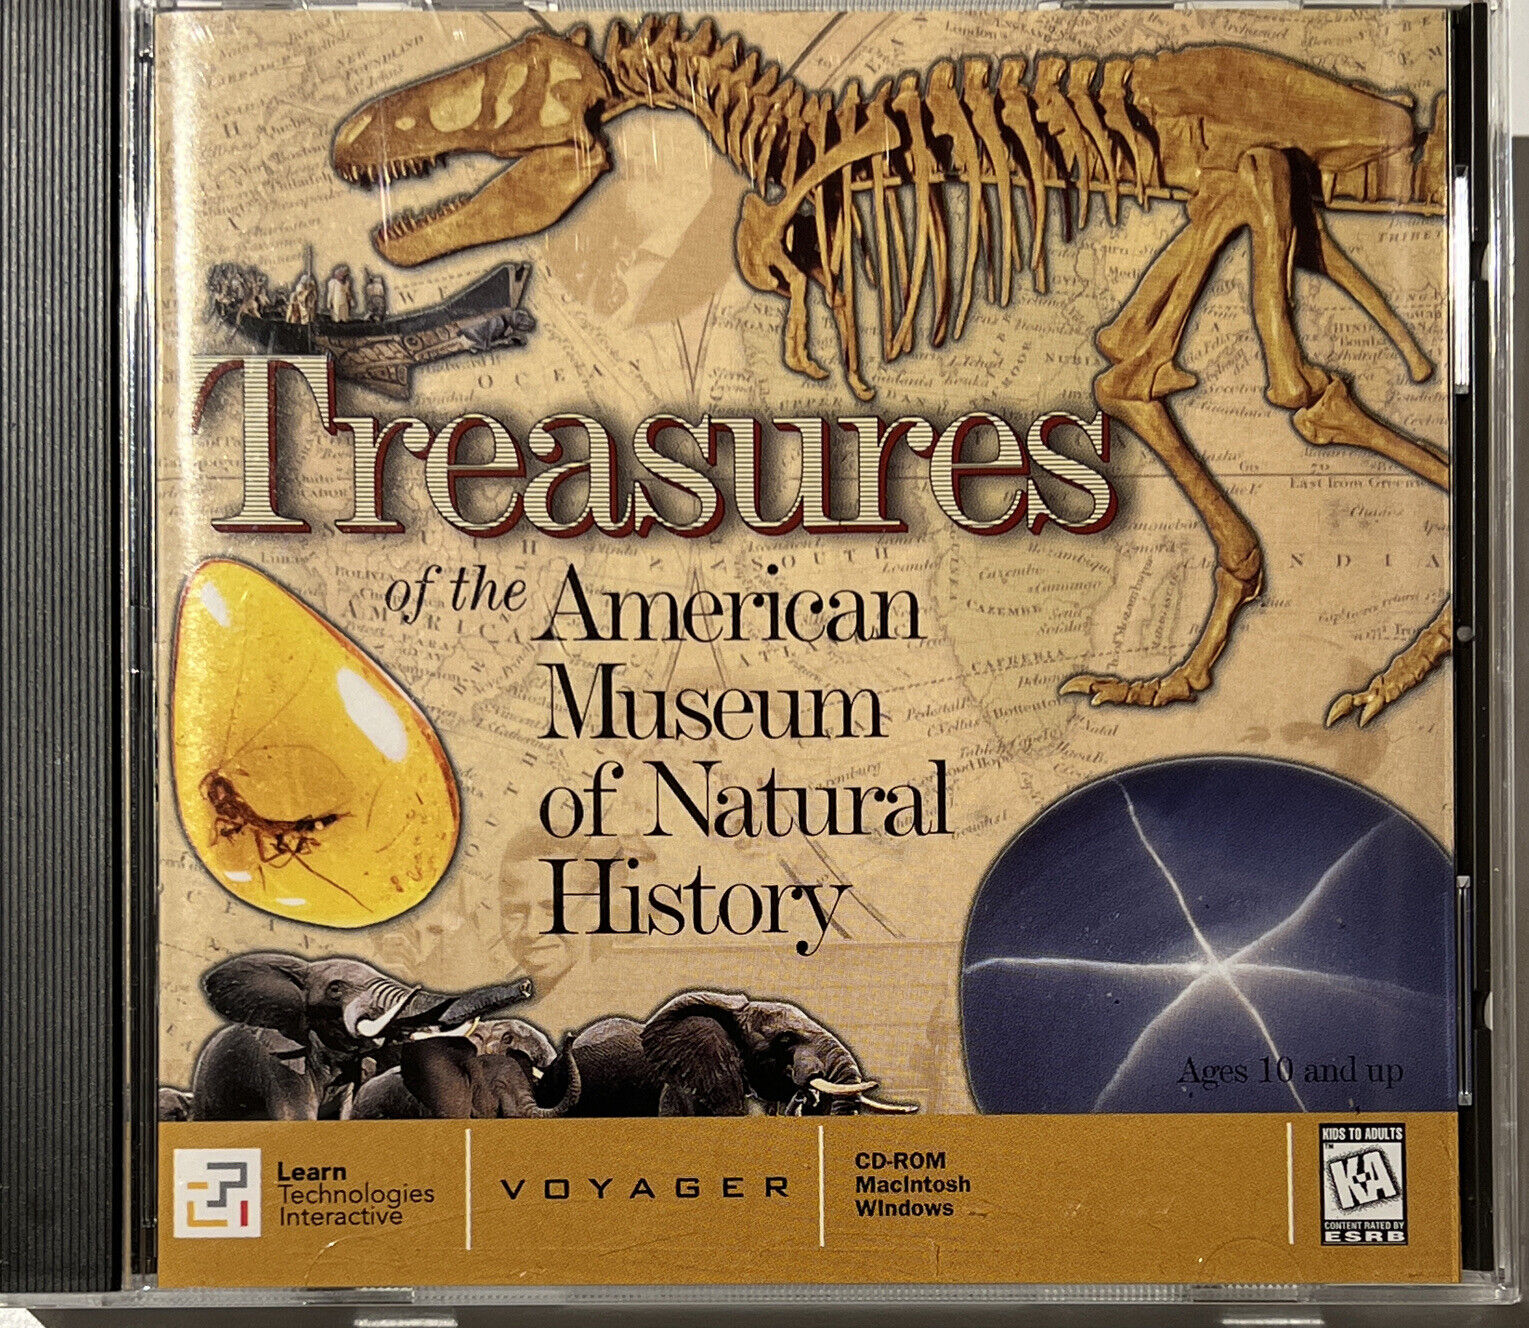 Treasures Of The American Museum Of Natural History CD-ROM 1996 Voyager Company